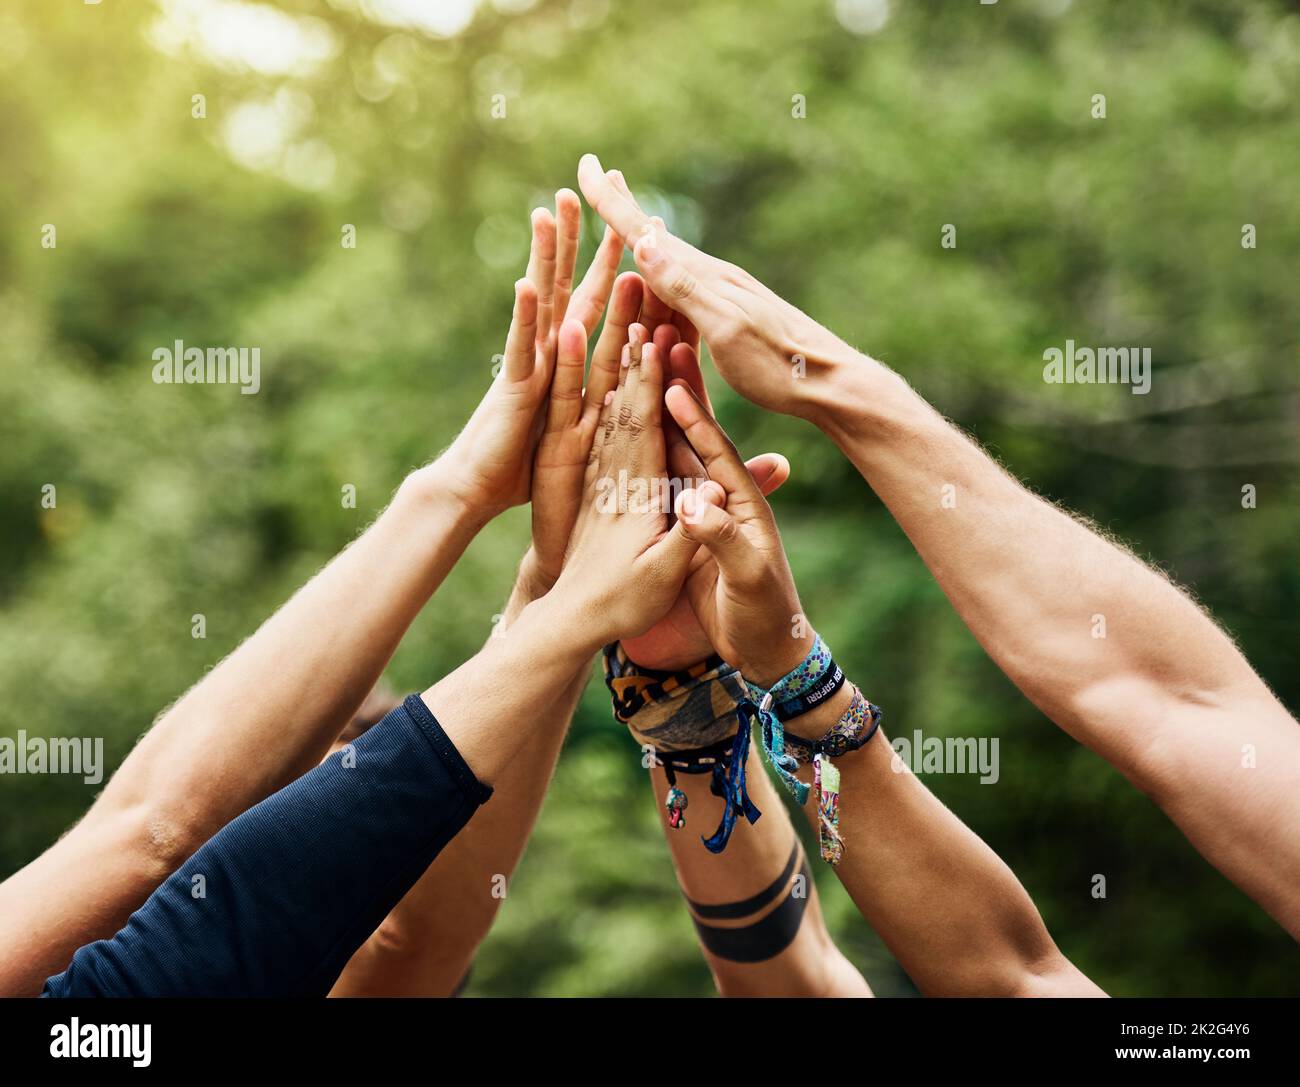 Time for some outdoor fun. Shot of a group of unrecognizable peoples hands raised in the air to form a huddle together outside during the day. Stock Photo